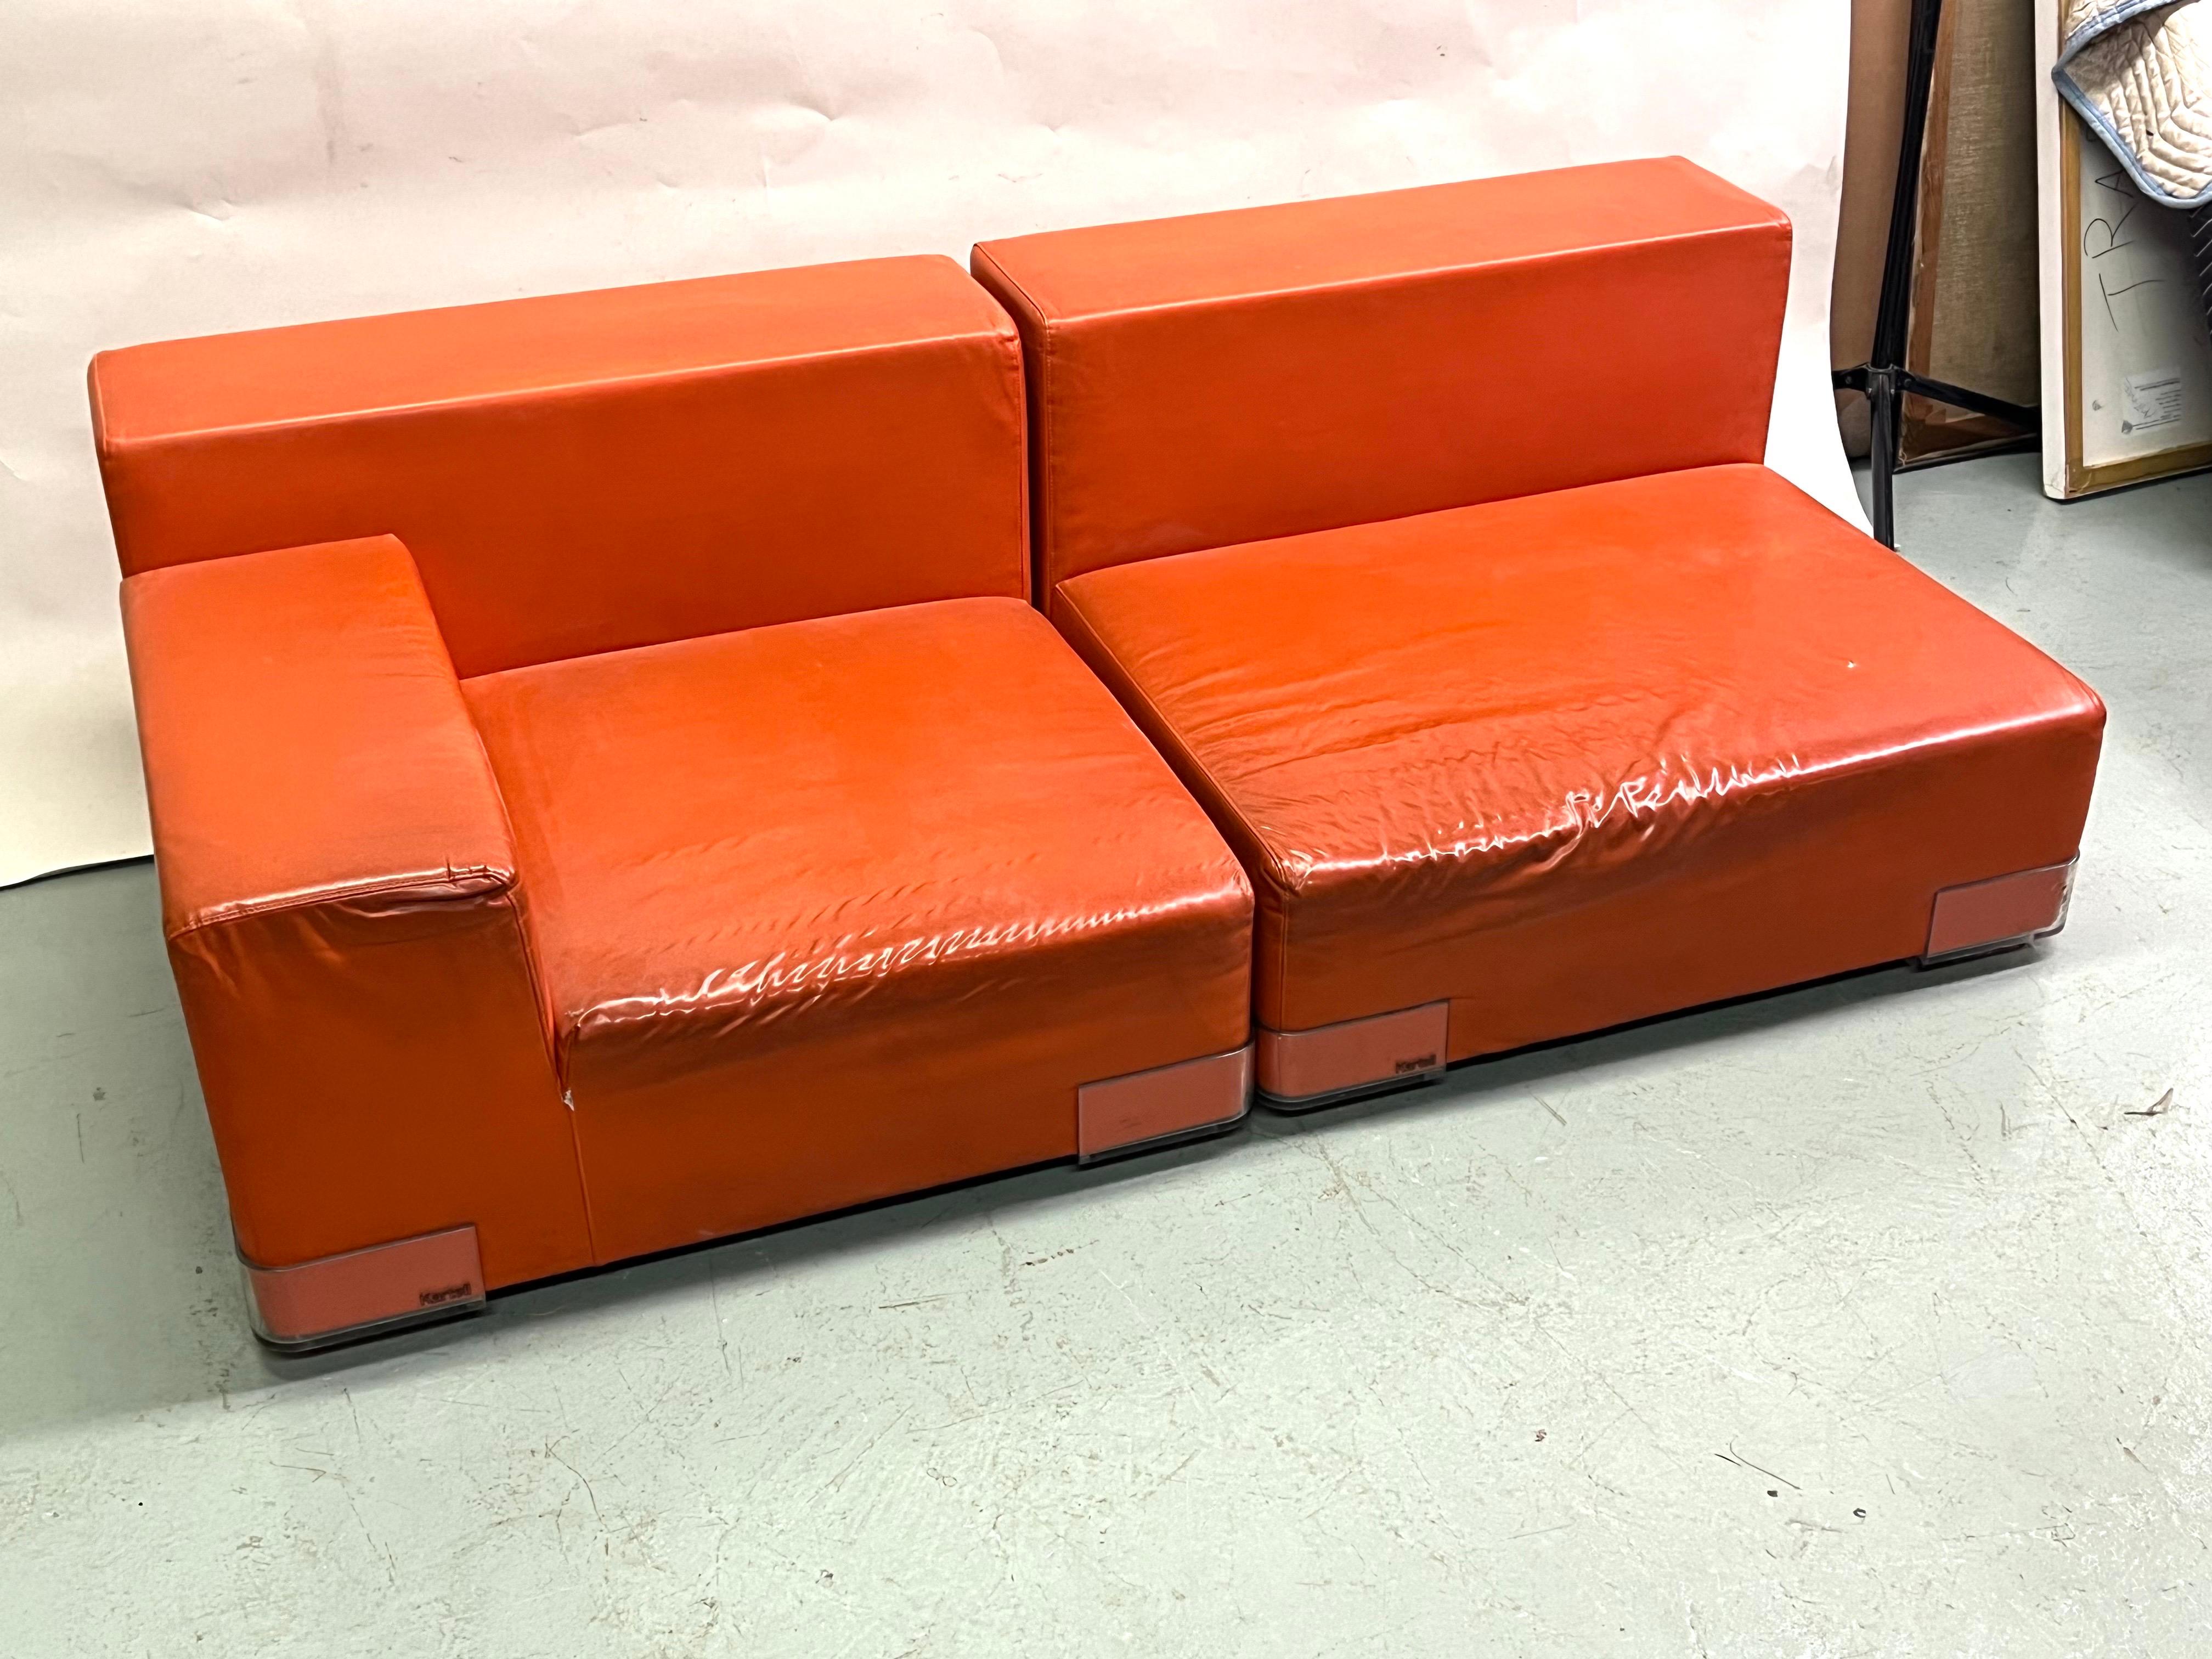 Plastic Italian Mid-Century Modern Pair of Lounge Chairs by Piero Lissoni   For Sale